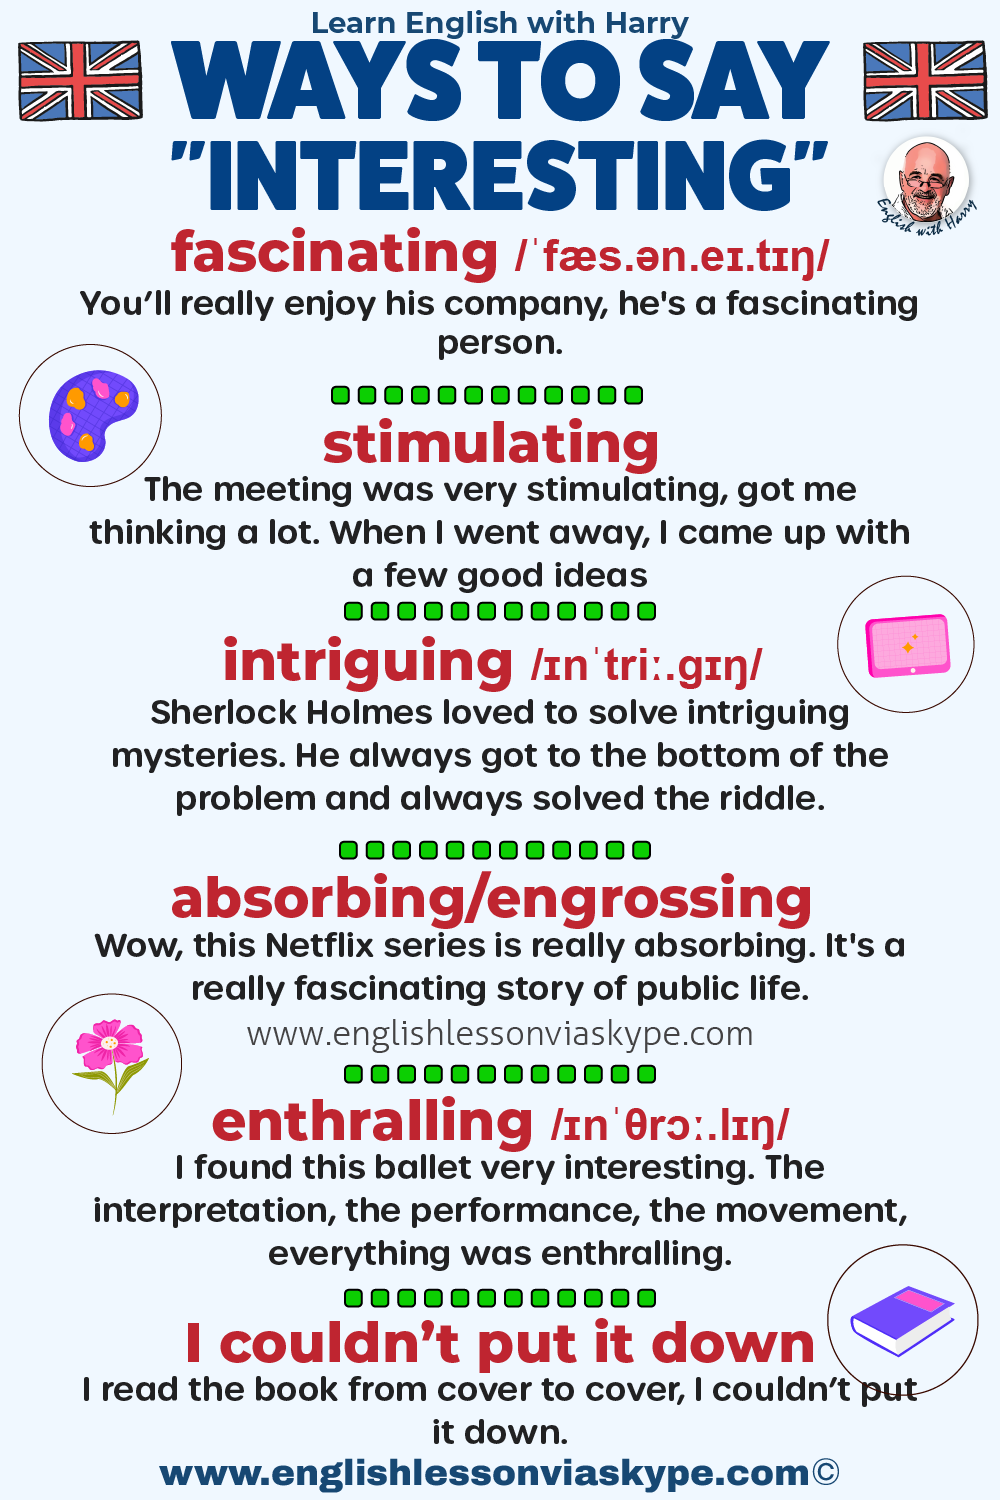 Other ways to say interesting in English. Advanced English lessons on Zoom and Skype. Click the link englishlessonviaskype.com #learnenglish